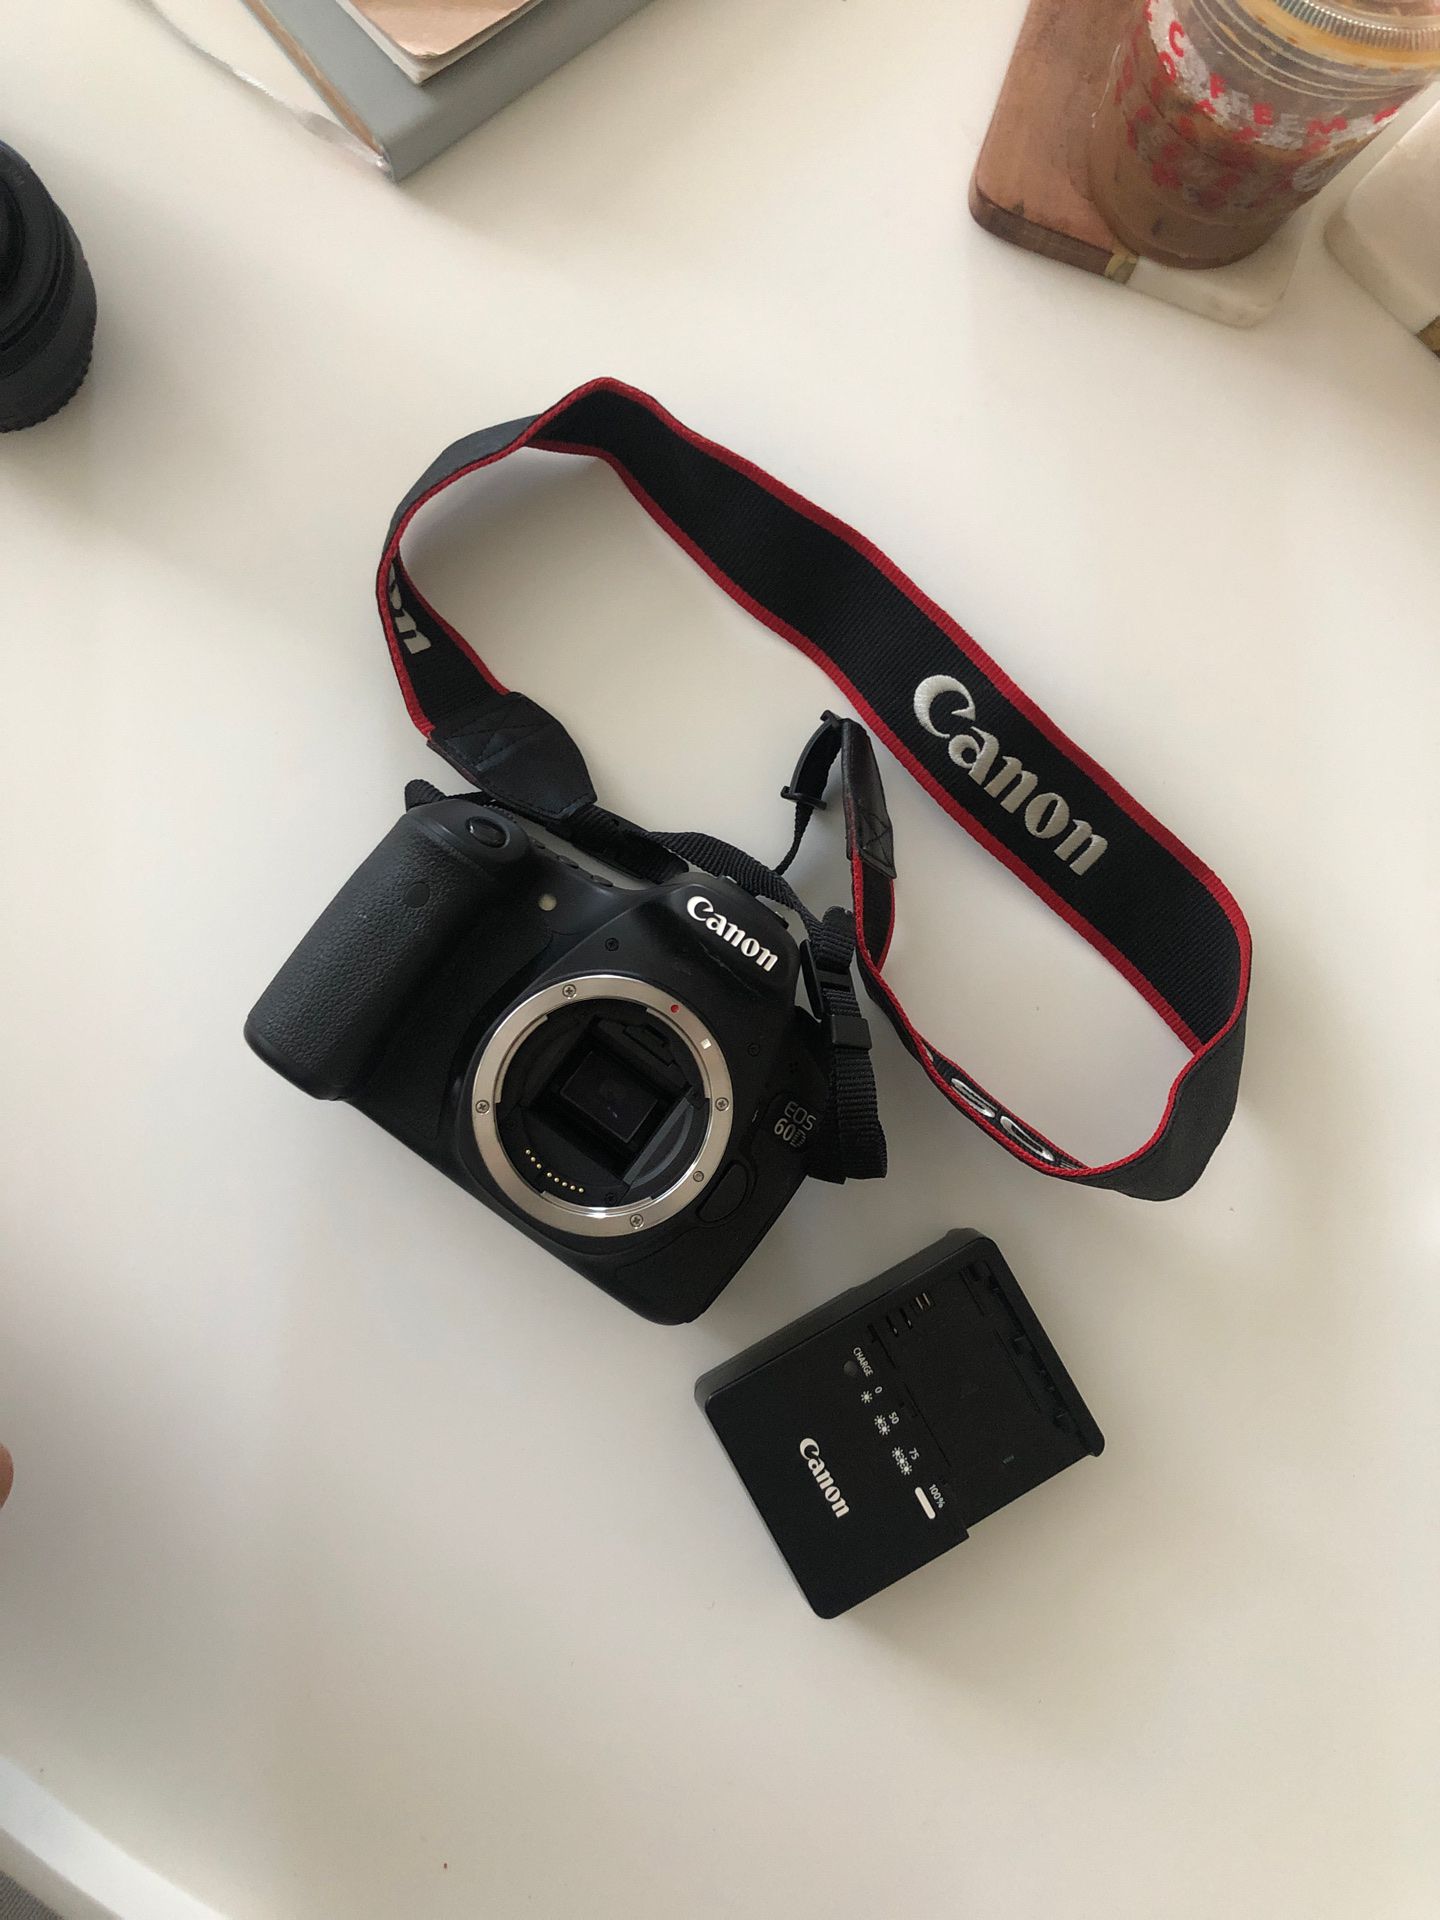 Canon EOS 60D camera (body and battery charger)